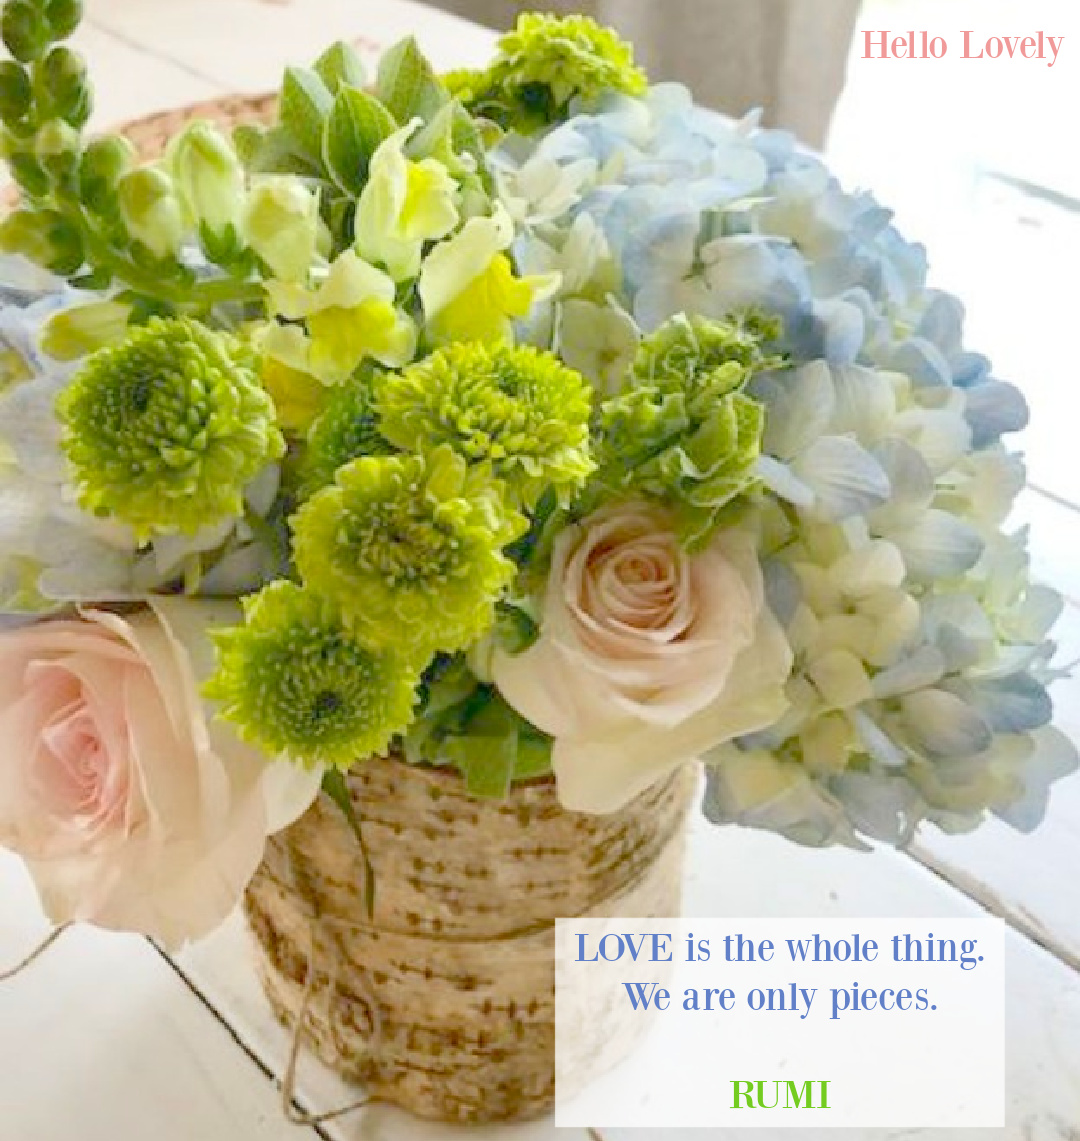 Pastel floral arrangement on my kitchen table with Rumi love quote - Hello Lovely Studio. #rumiquotes